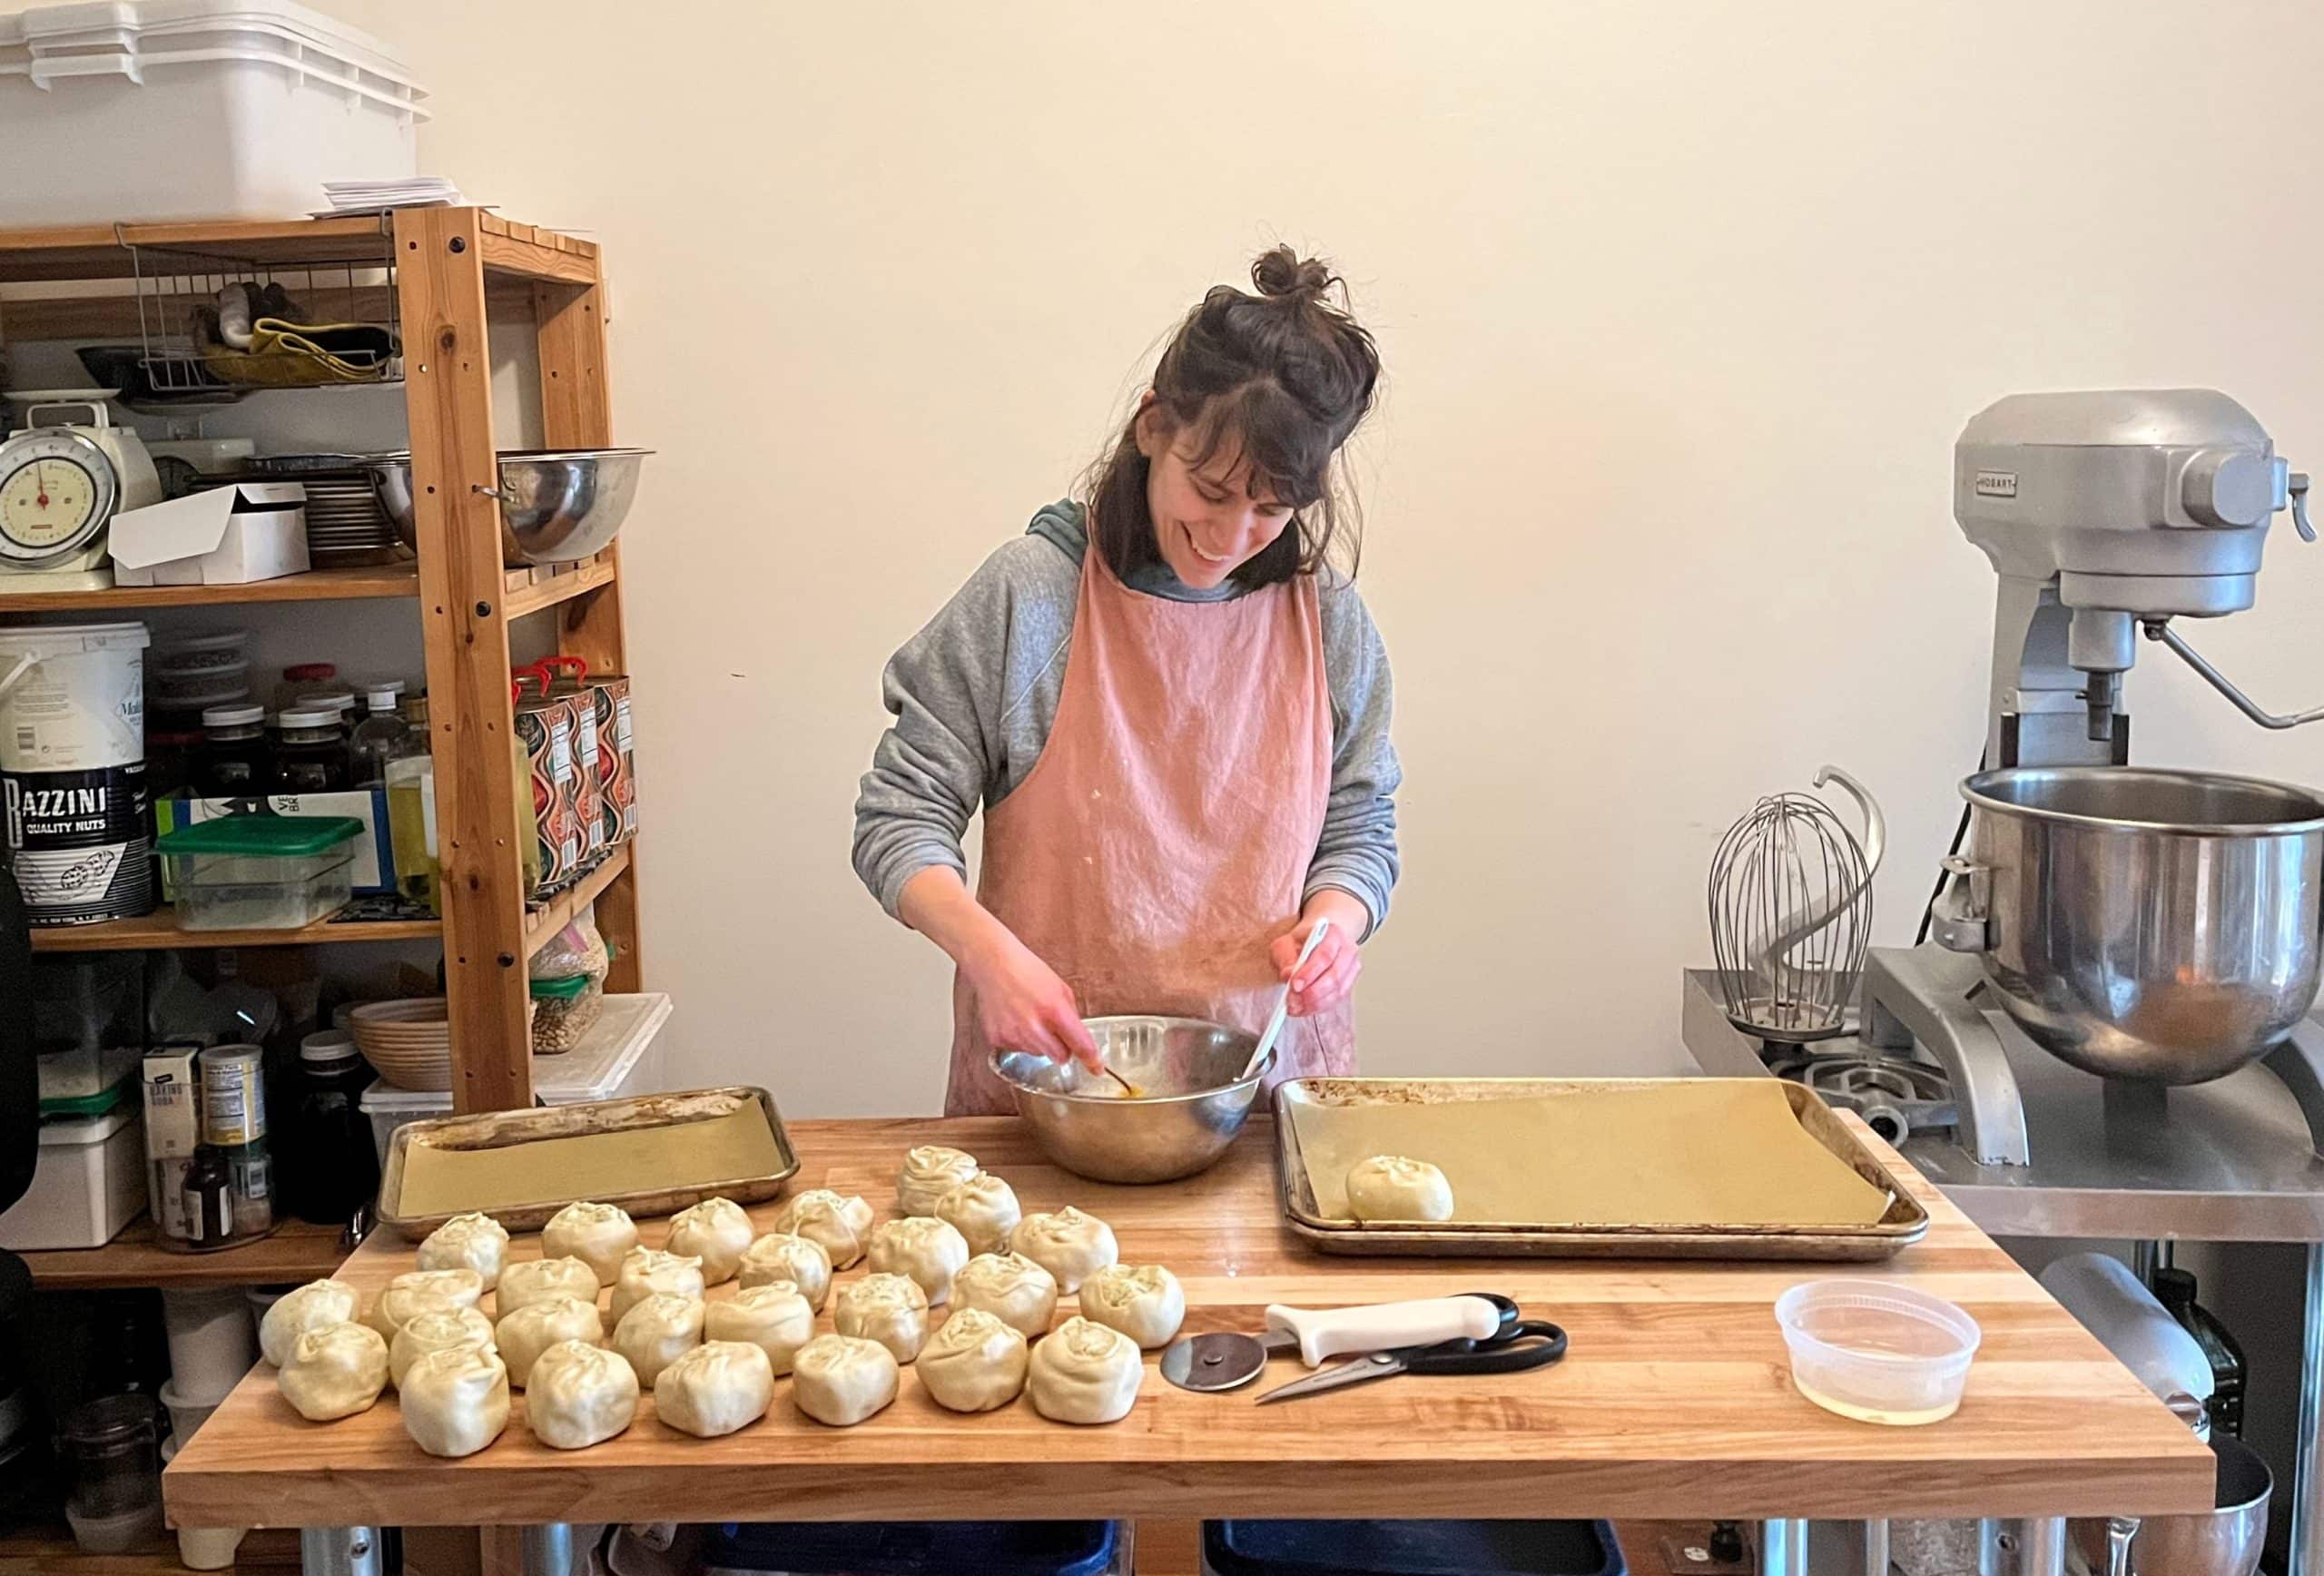 Image: woman in apron standing behind baker's table mixing dough with a dozen unbaked rolls in front of her